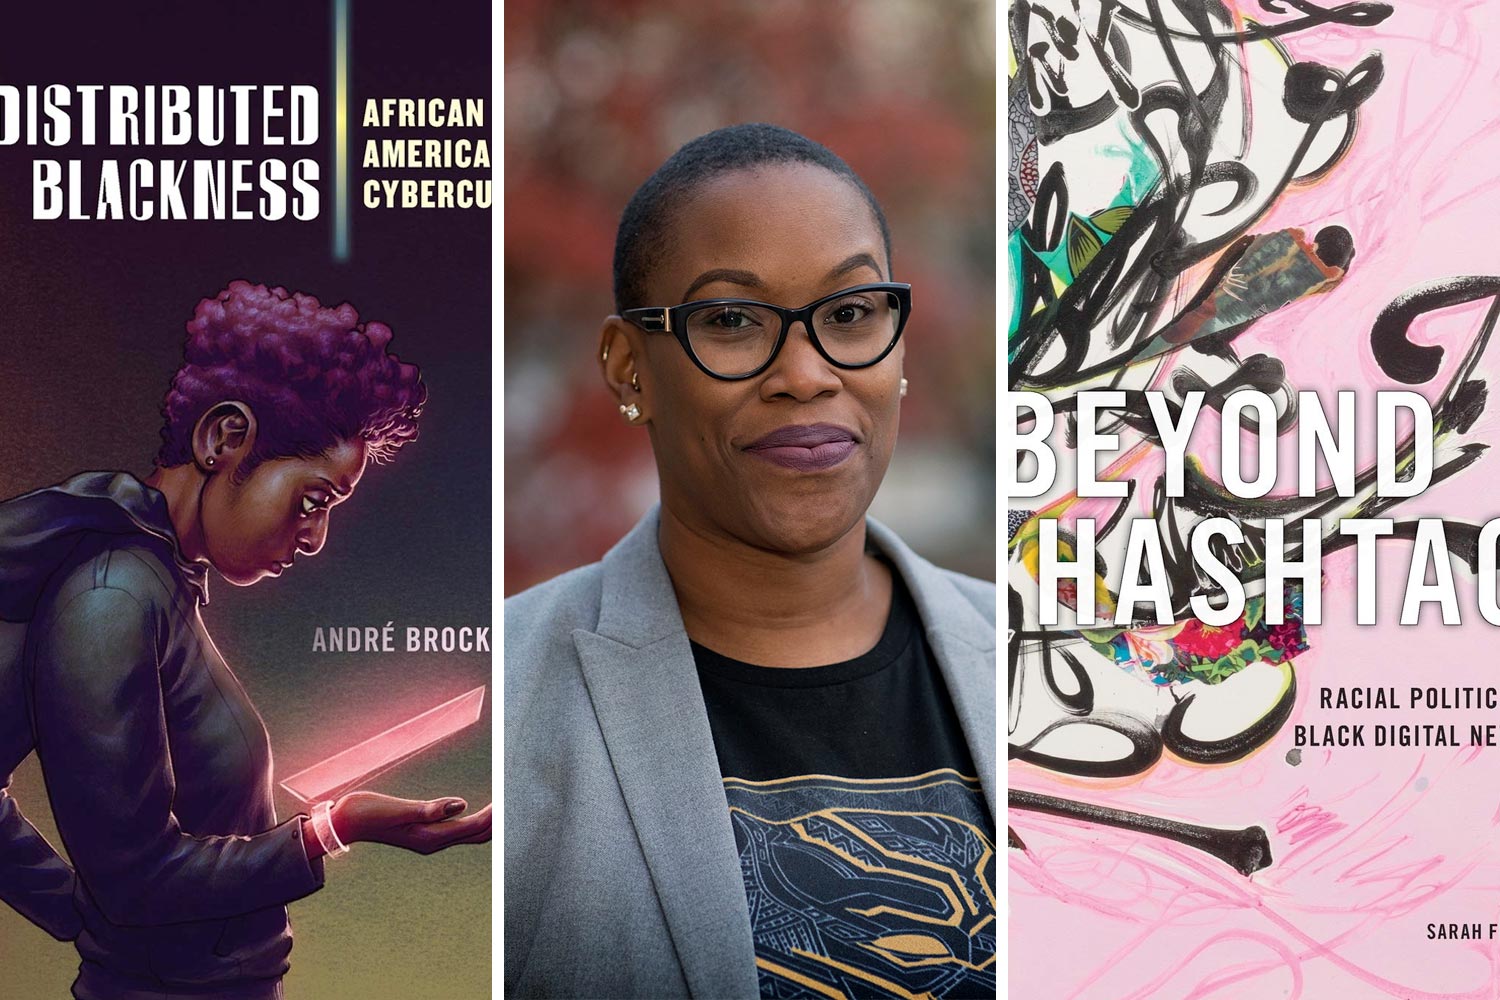 Left: Distributed Blackness African American cyber culture Middle: Meredith Clark Right: Book cover reads Beyond Hashtag Racial Political Black Digital 